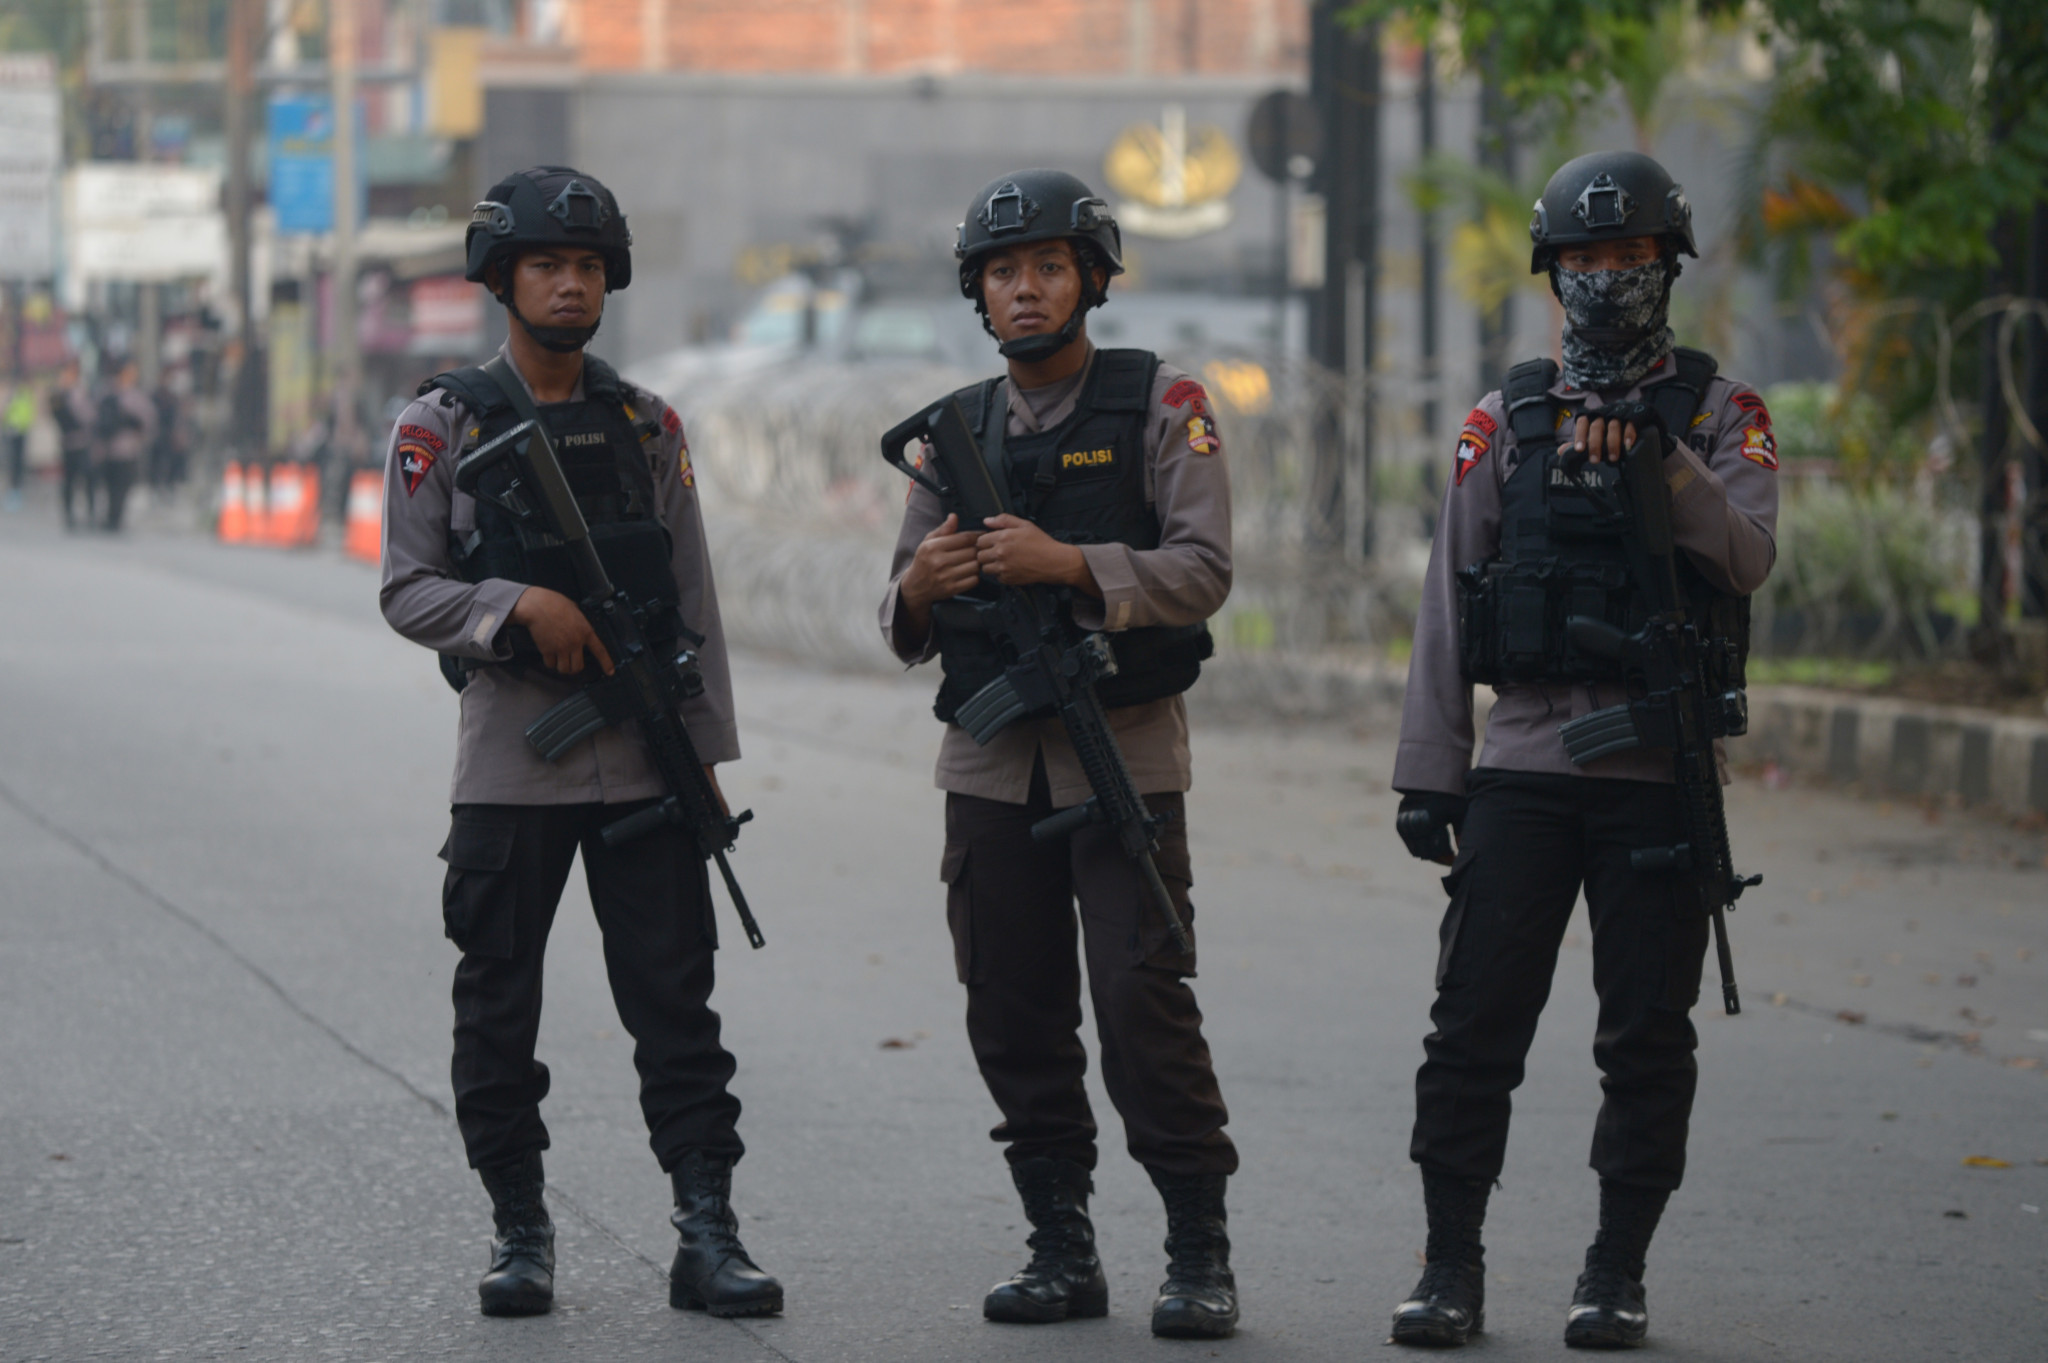 Security concerns have risen in Indonesia following terrorist attacks ©Getty Images